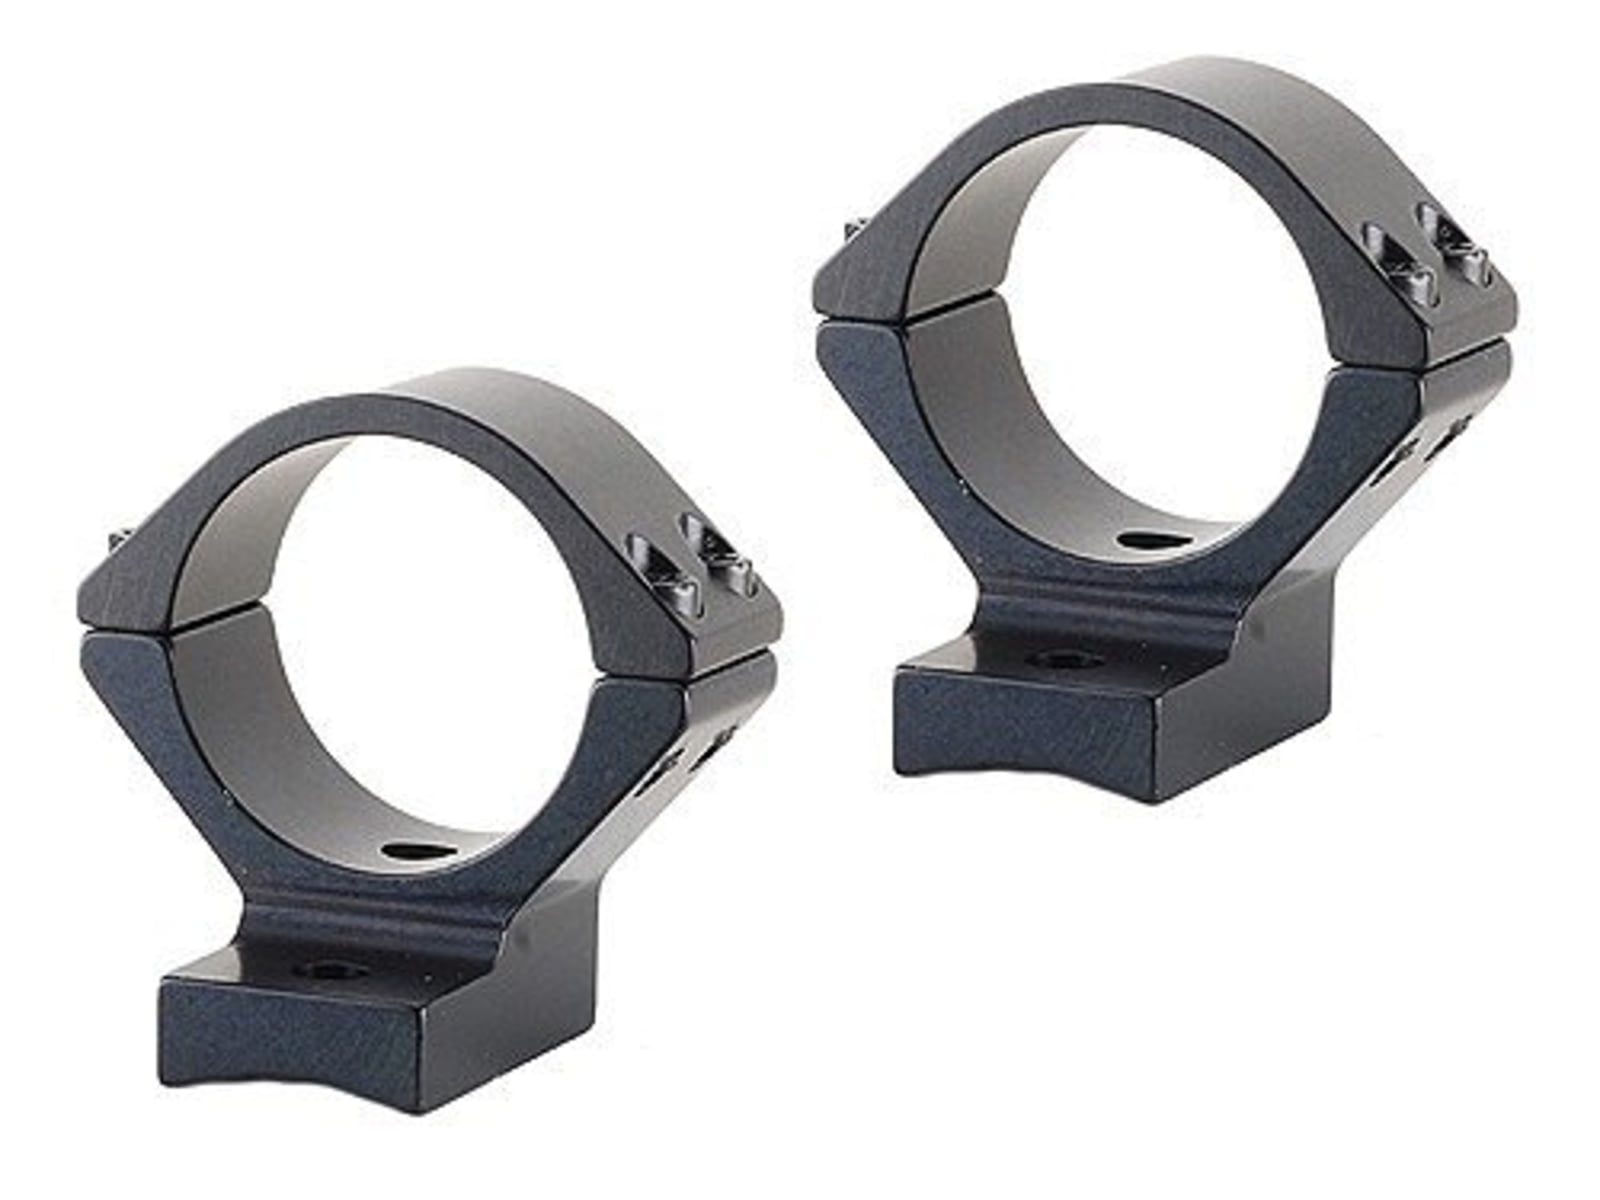 StrataRise 9mm Height Extender Ring for 1836 & 2442 Pedestals